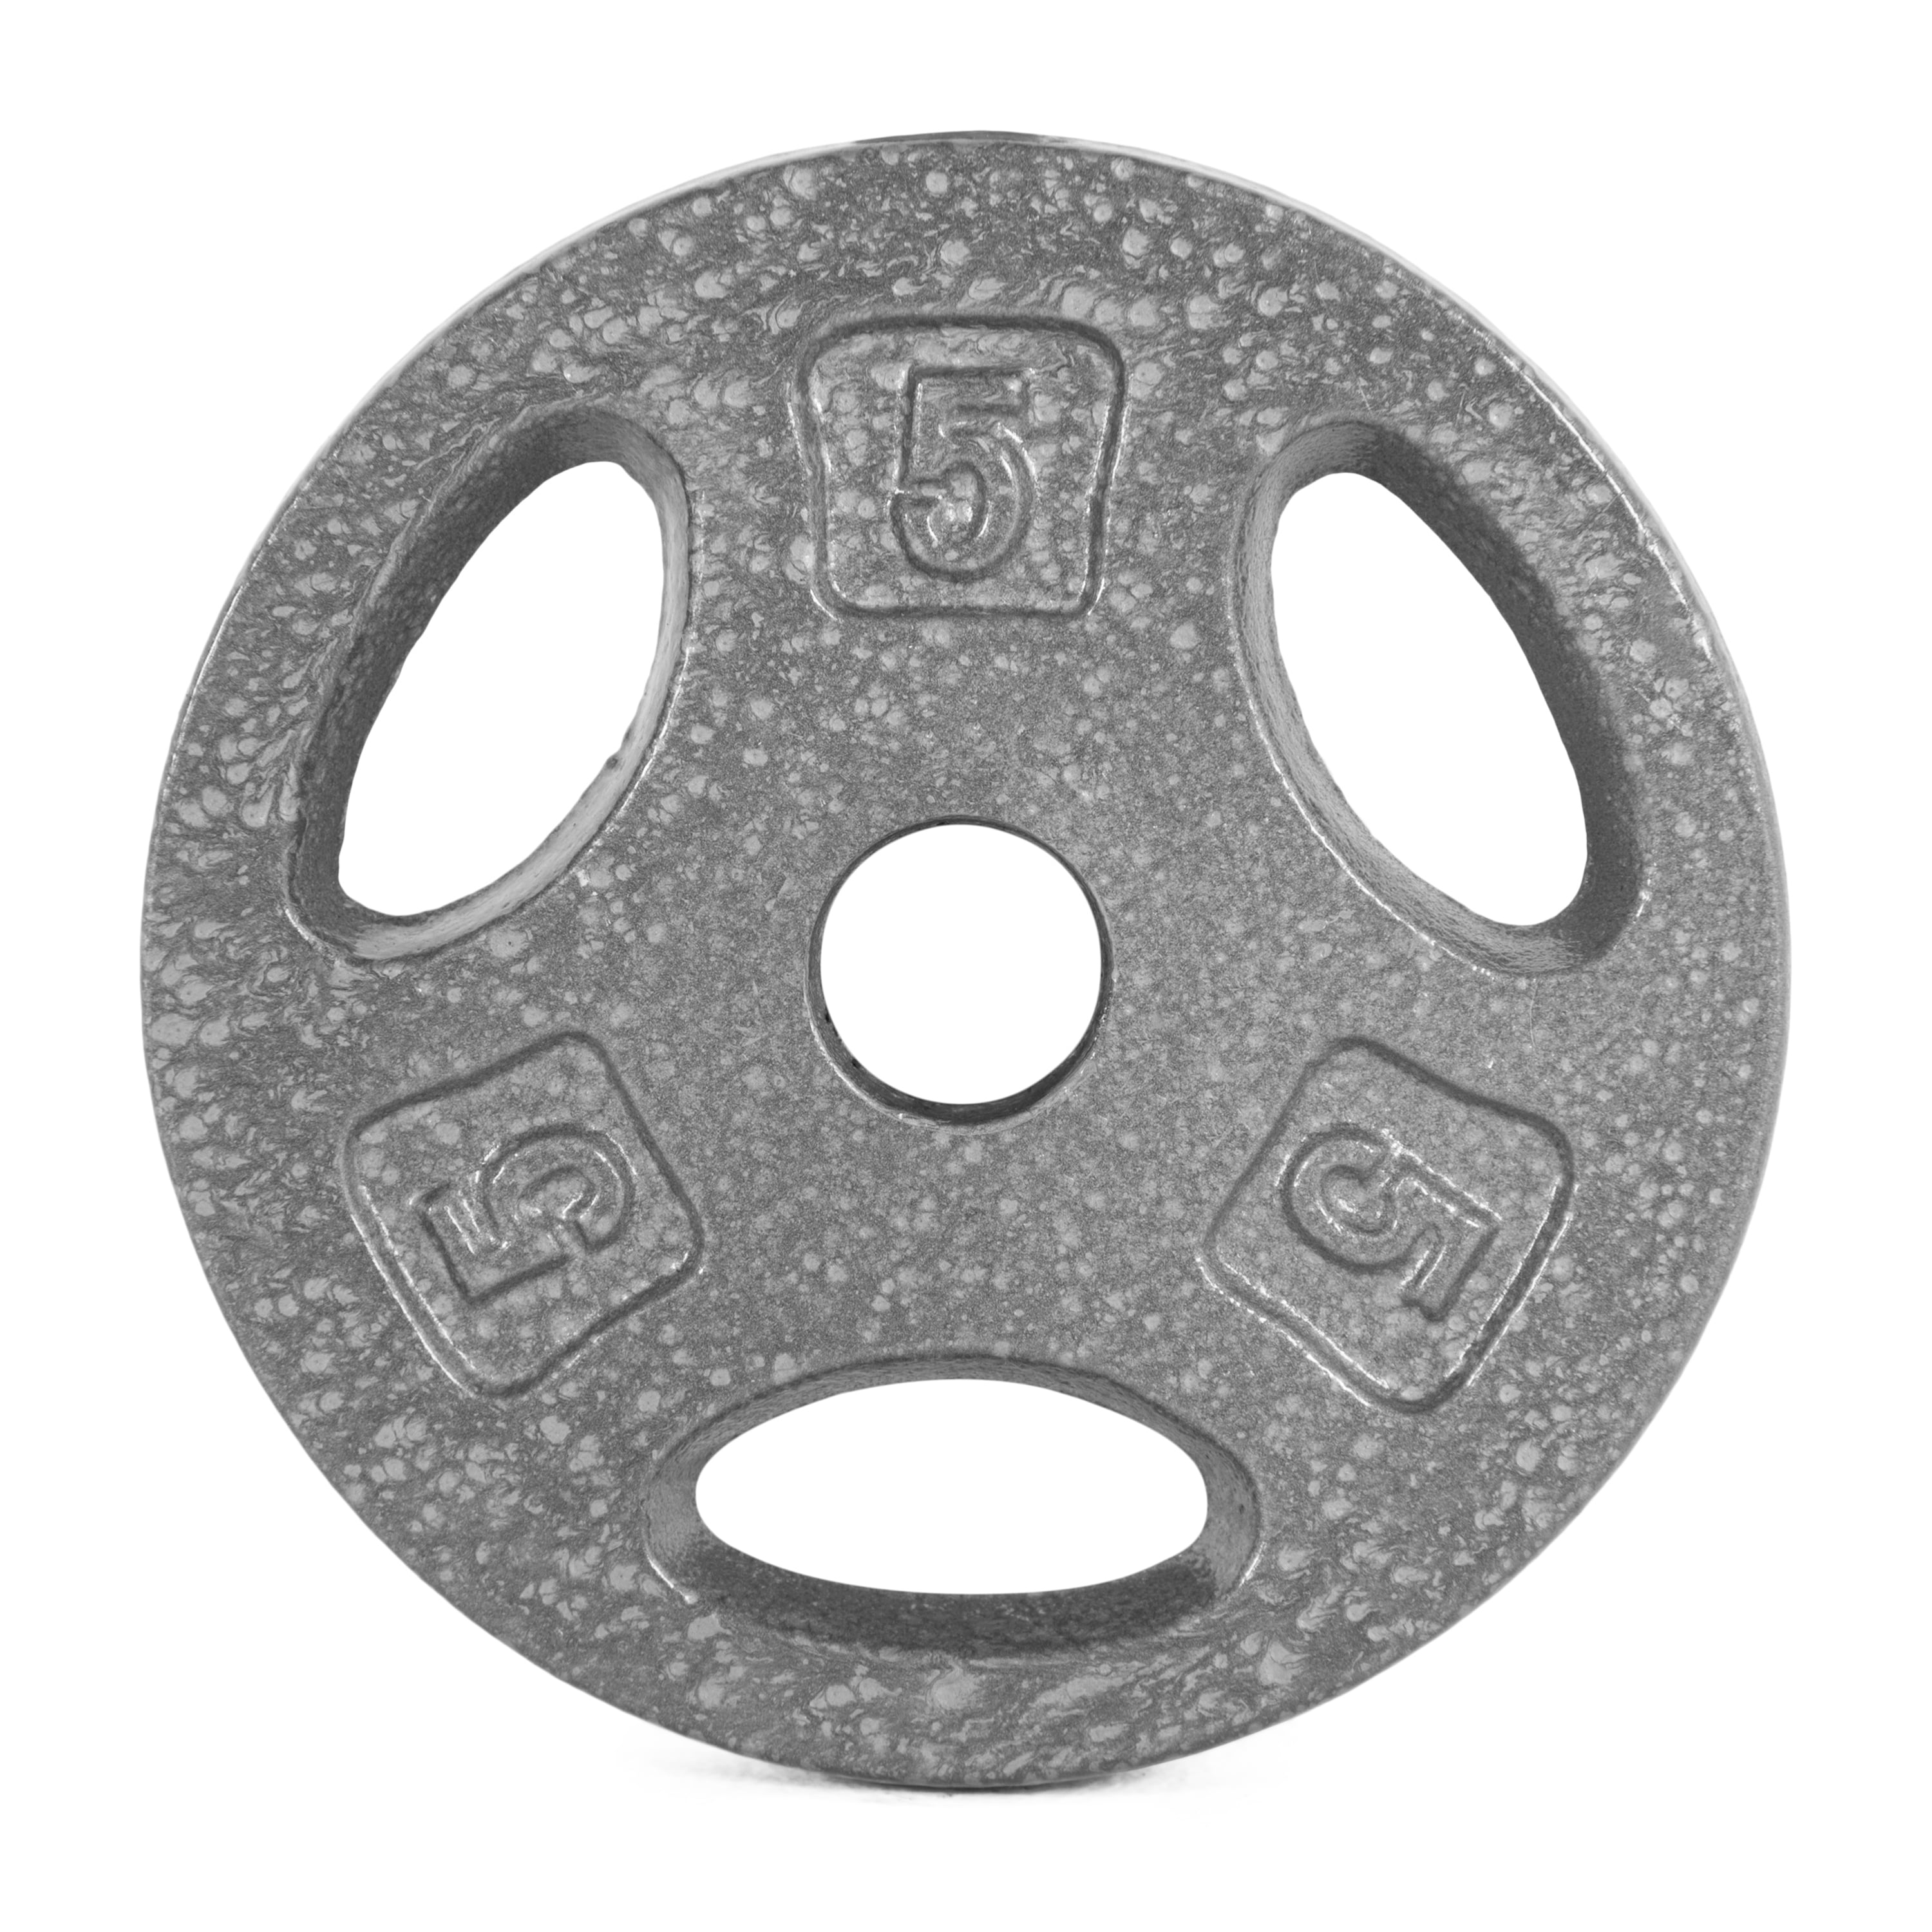 CAP RWP005 5lbs Barbell Standard Weightlifting Plate Gray for sale online 